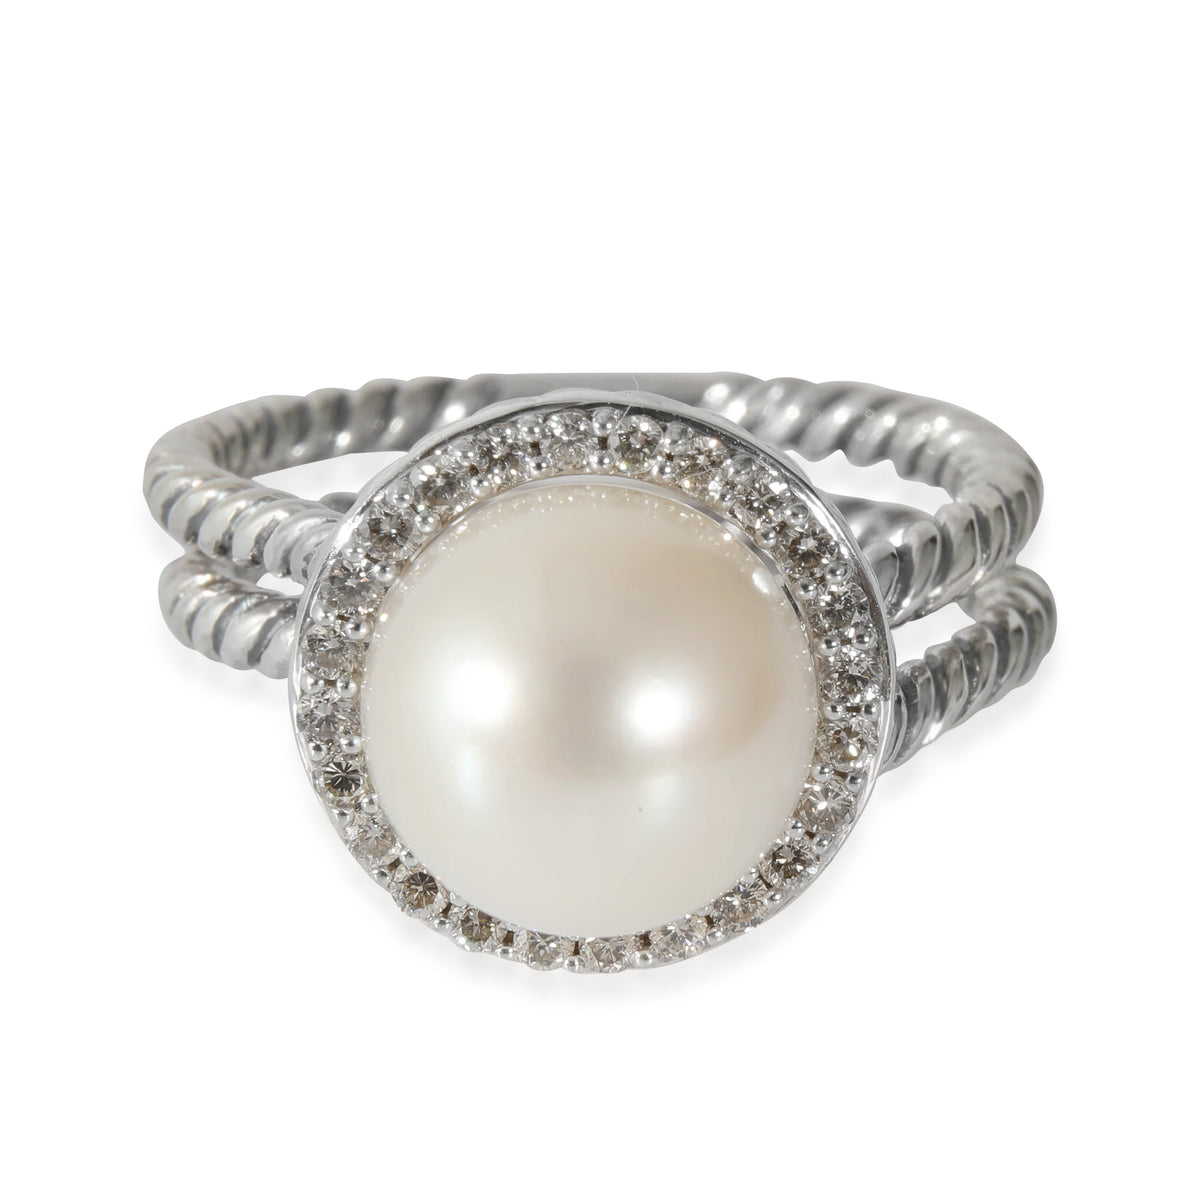 David Yurman Cable Collection Pearl Ring in  Sterling Silver 0.2 CTW